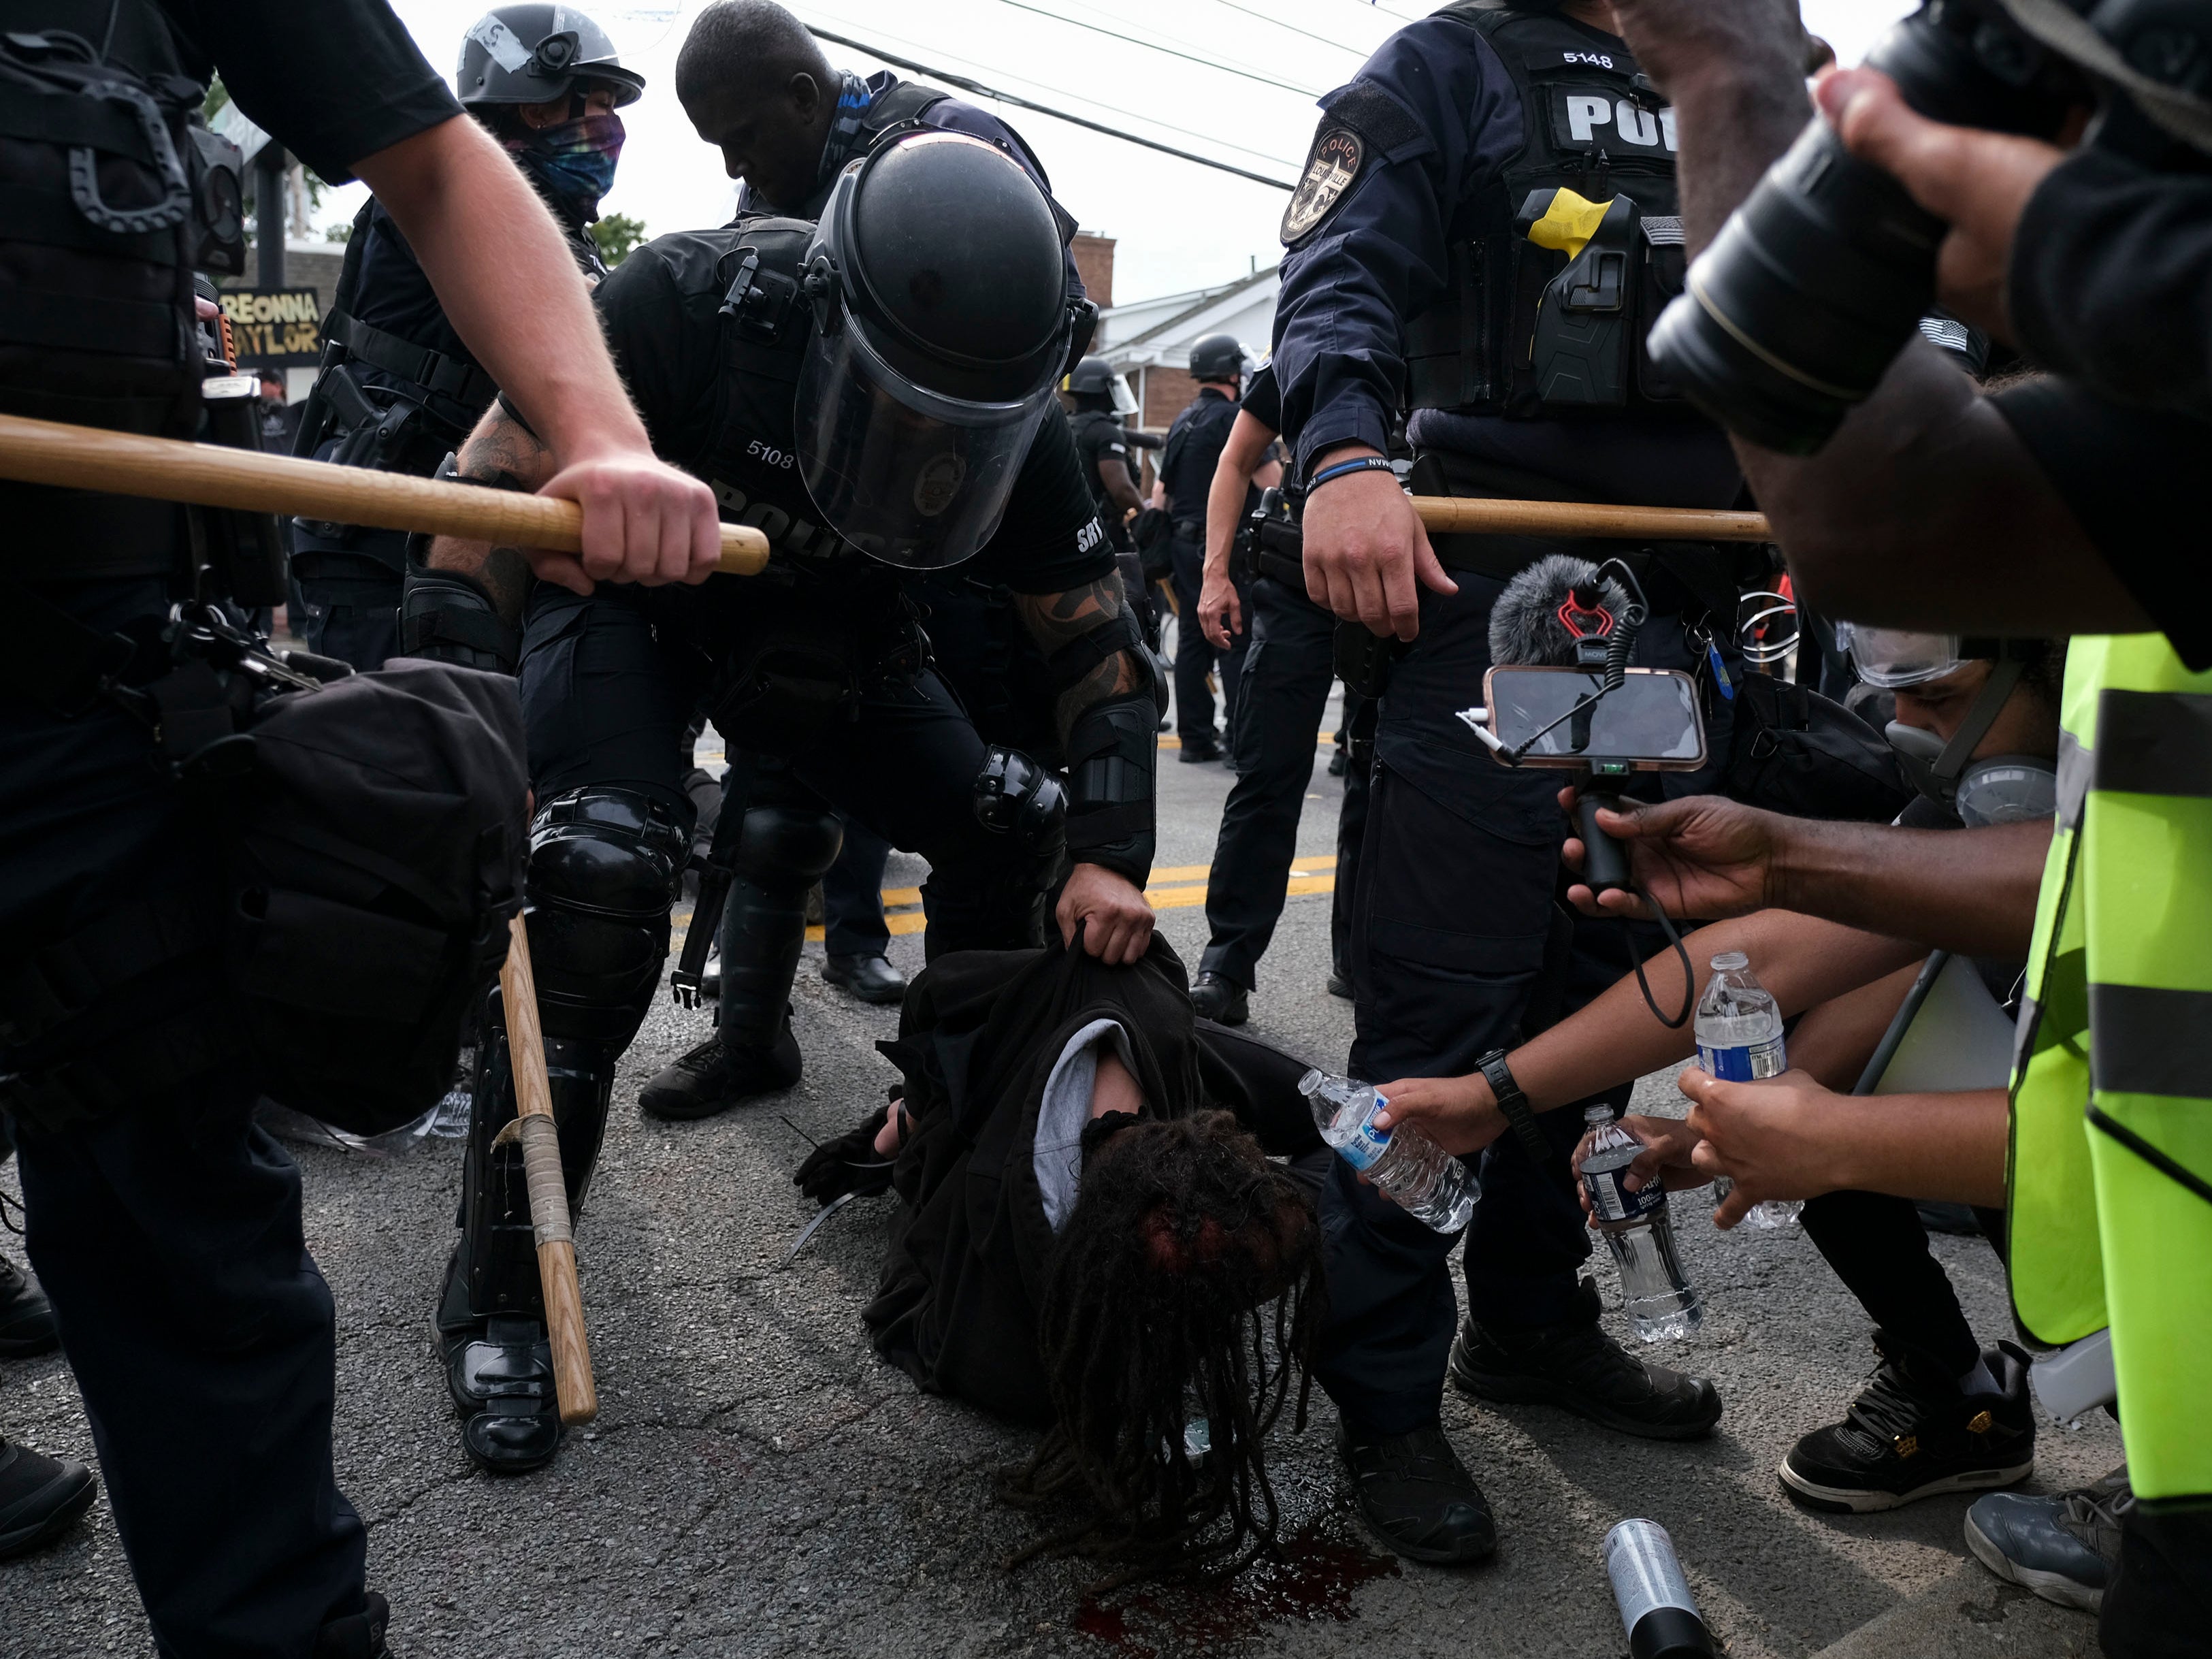 A BLM protestor is detained while bleeding from the head in downtown Louisville, on September 23, 2020